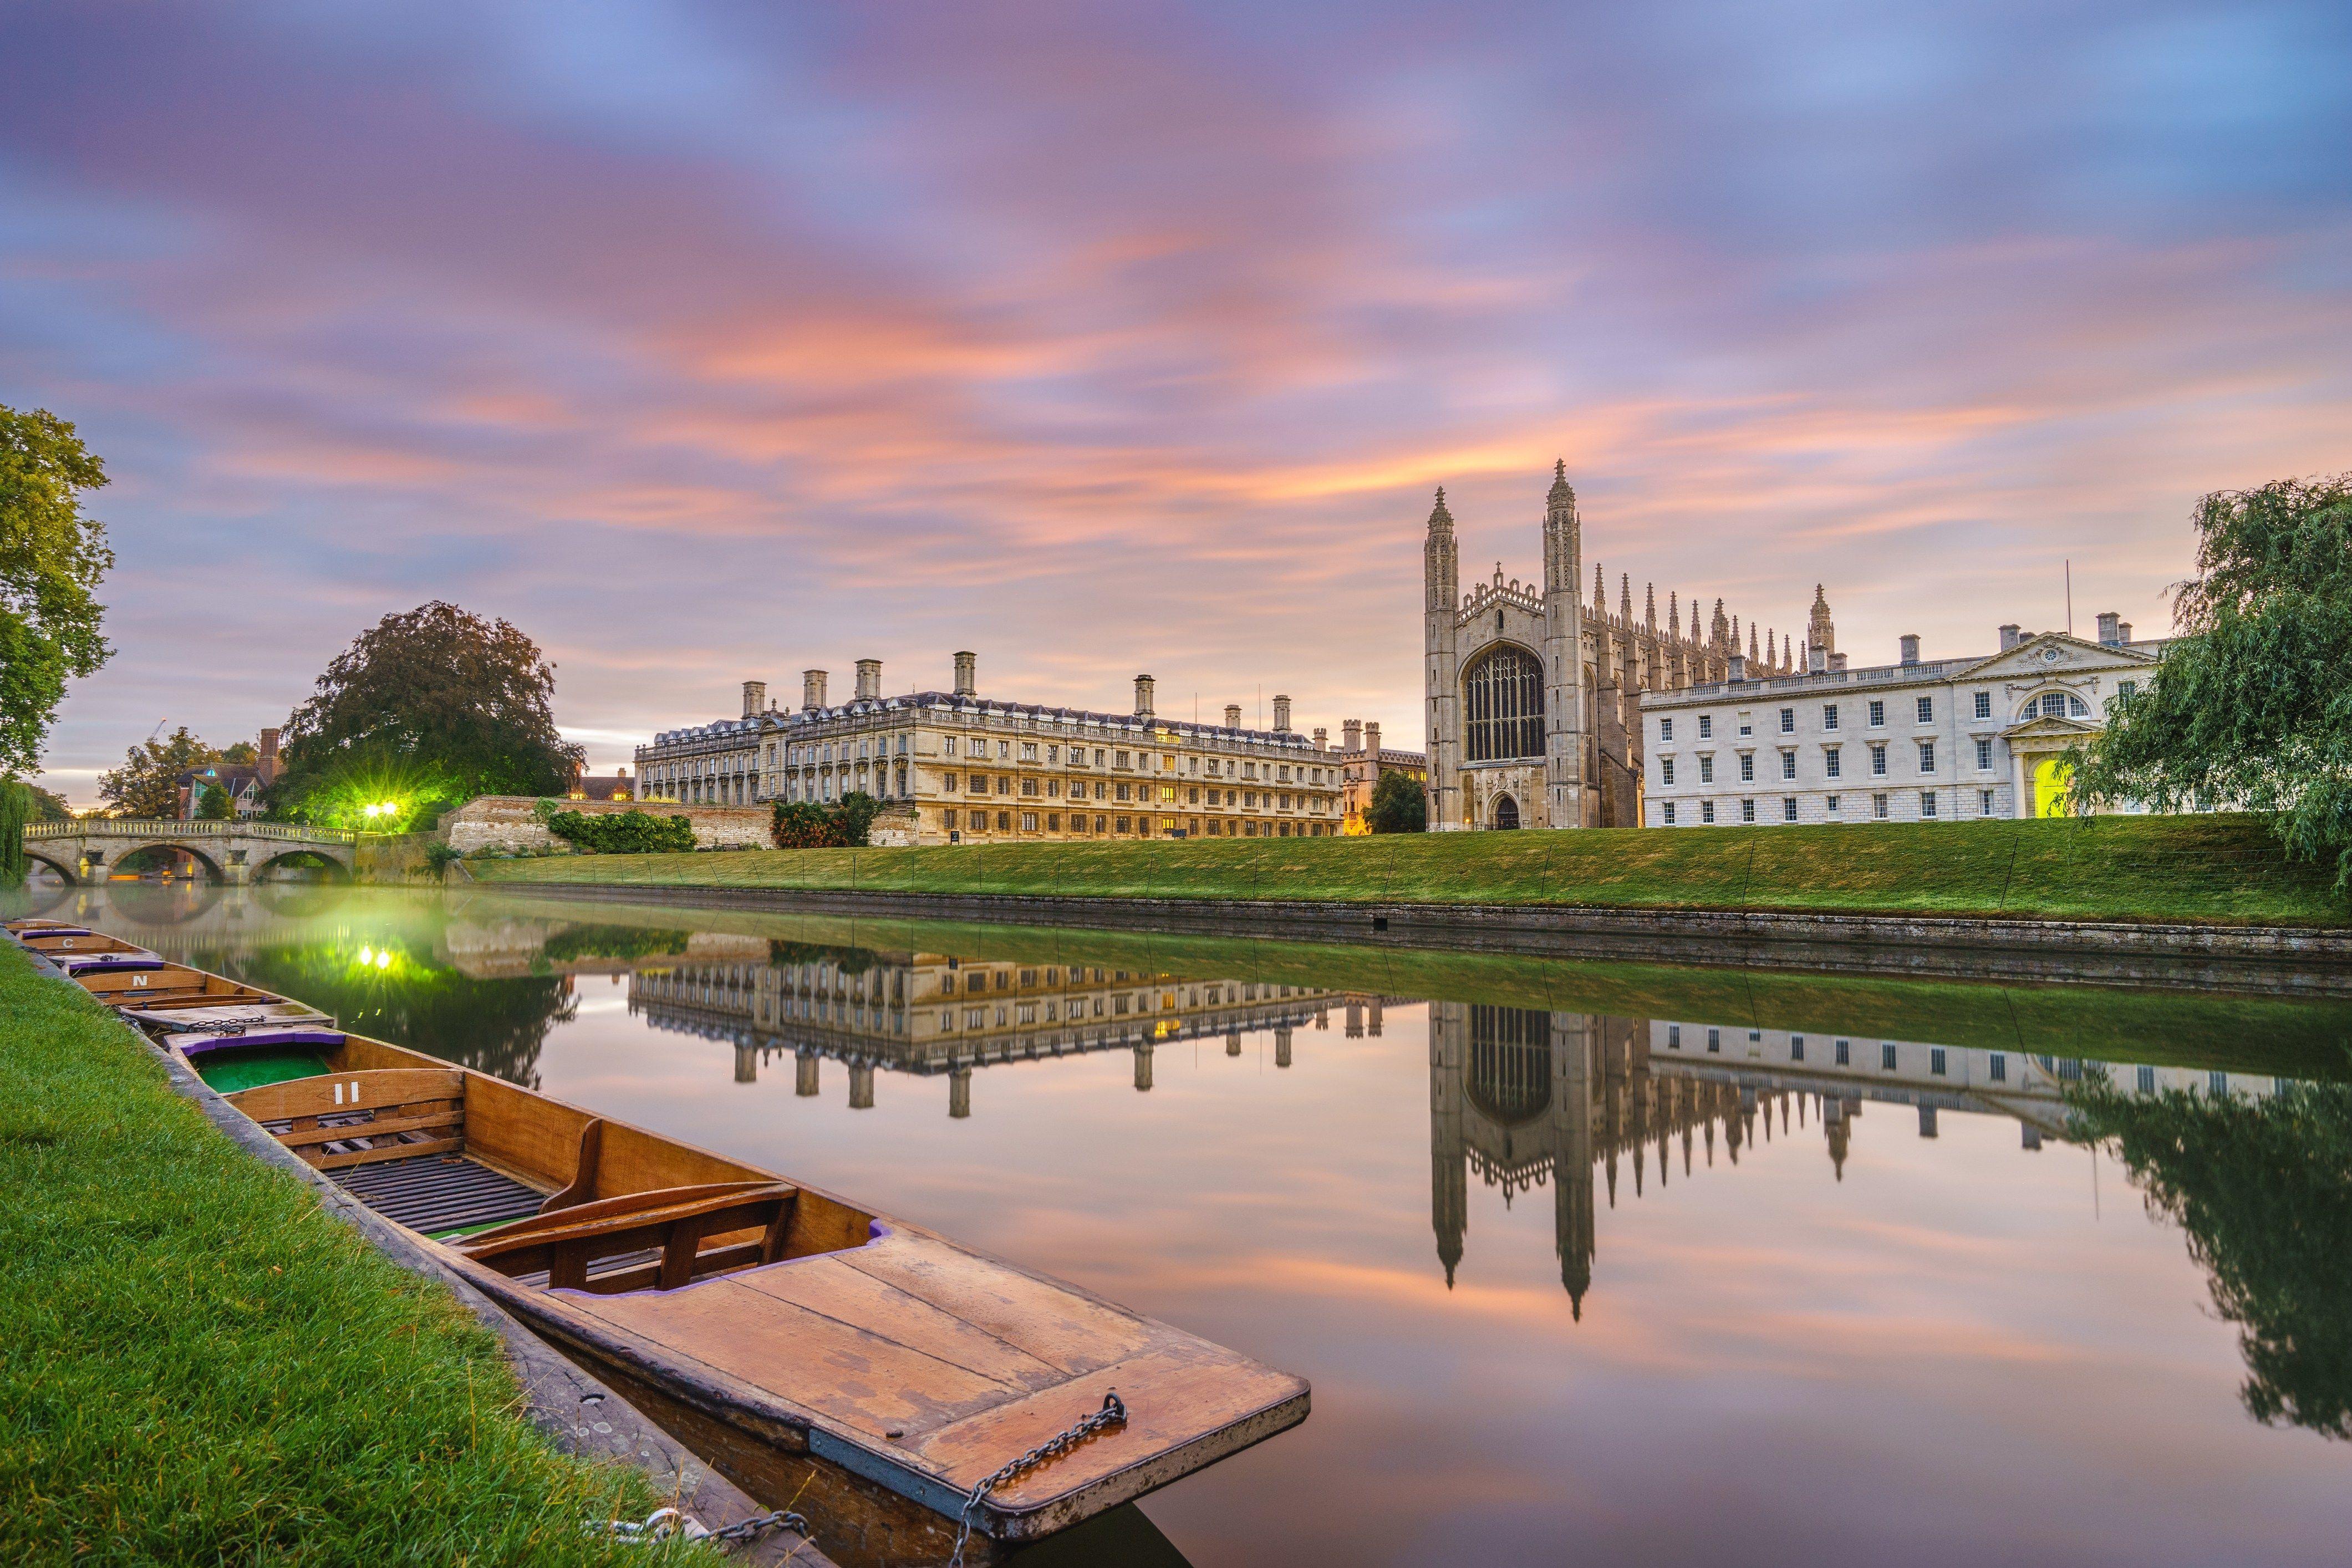 which city to visit cambridge or oxford